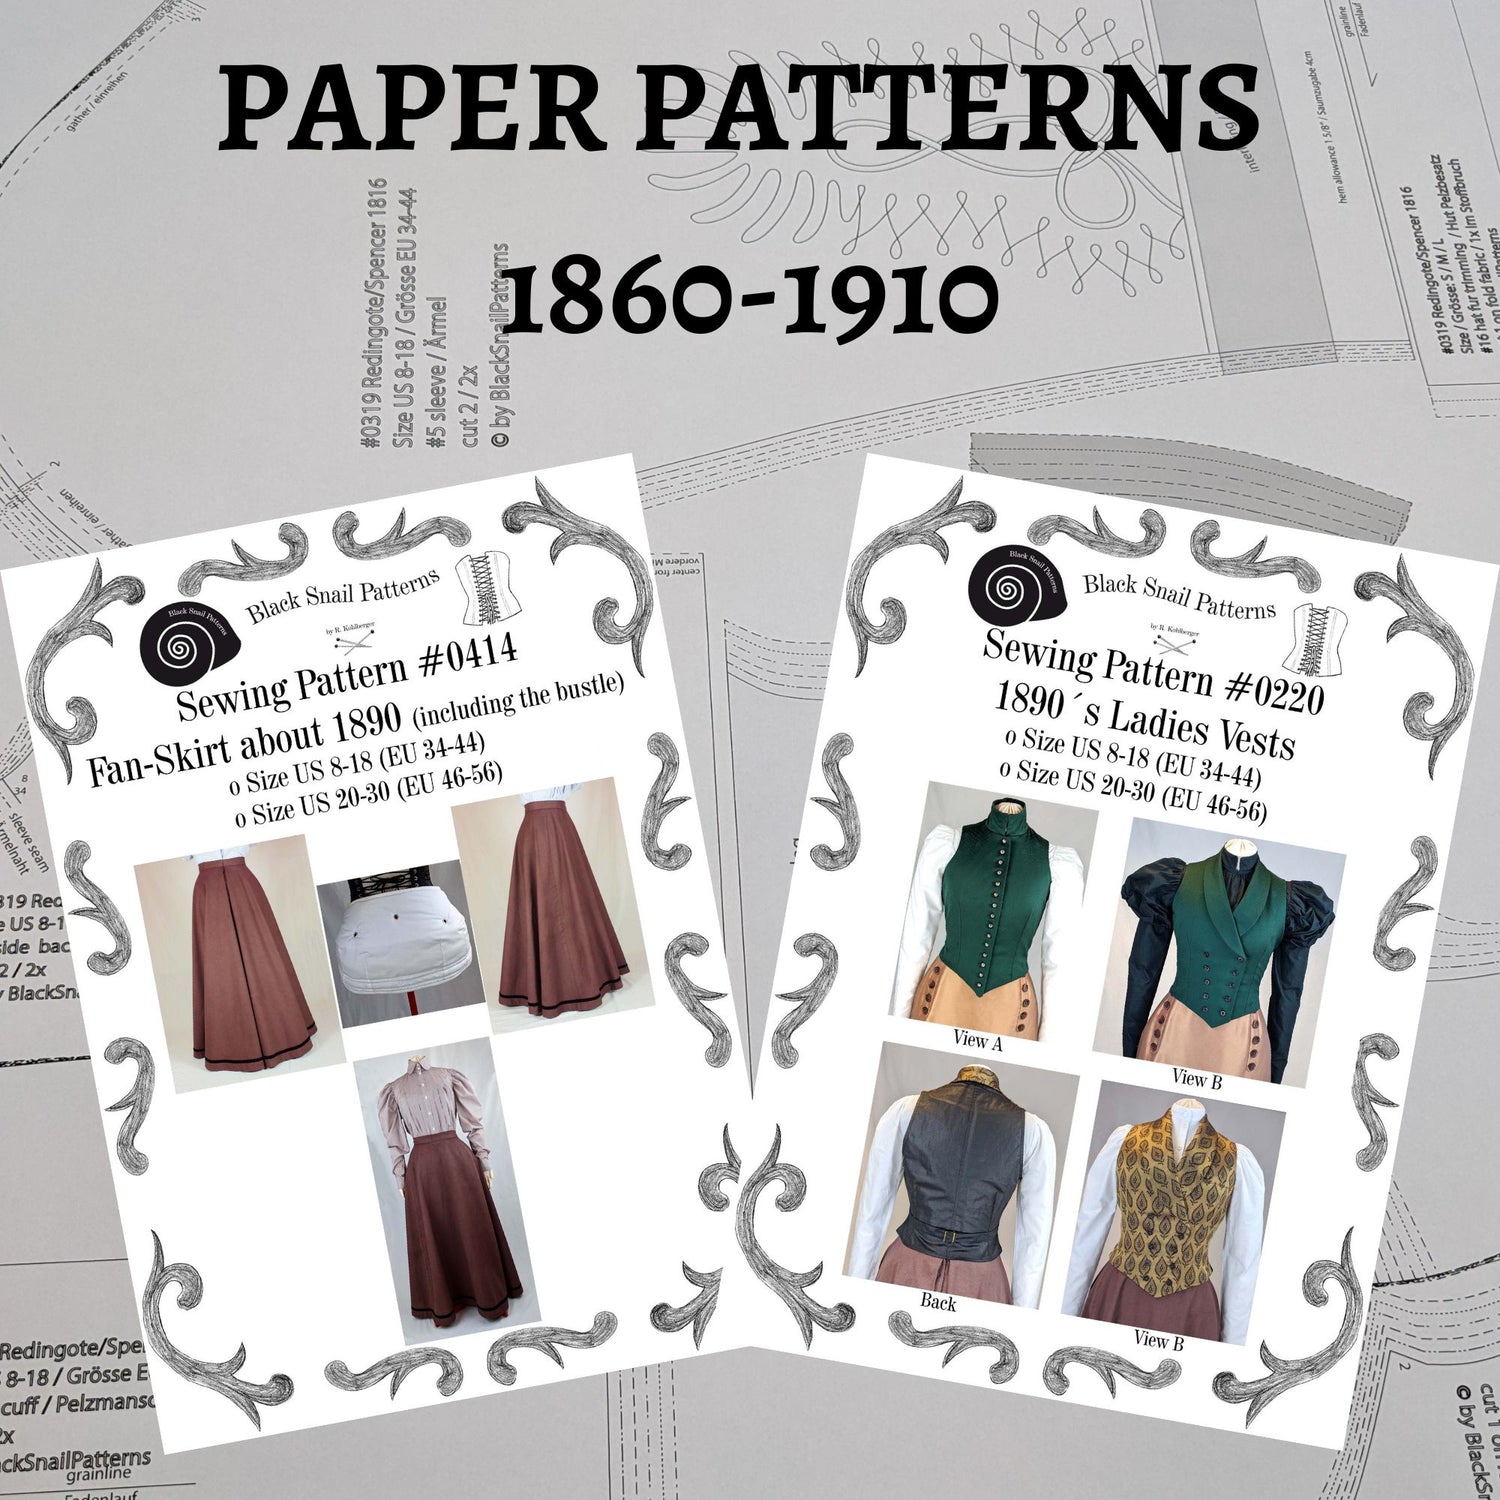 Paper pattern 1860-1910 for Women and Men